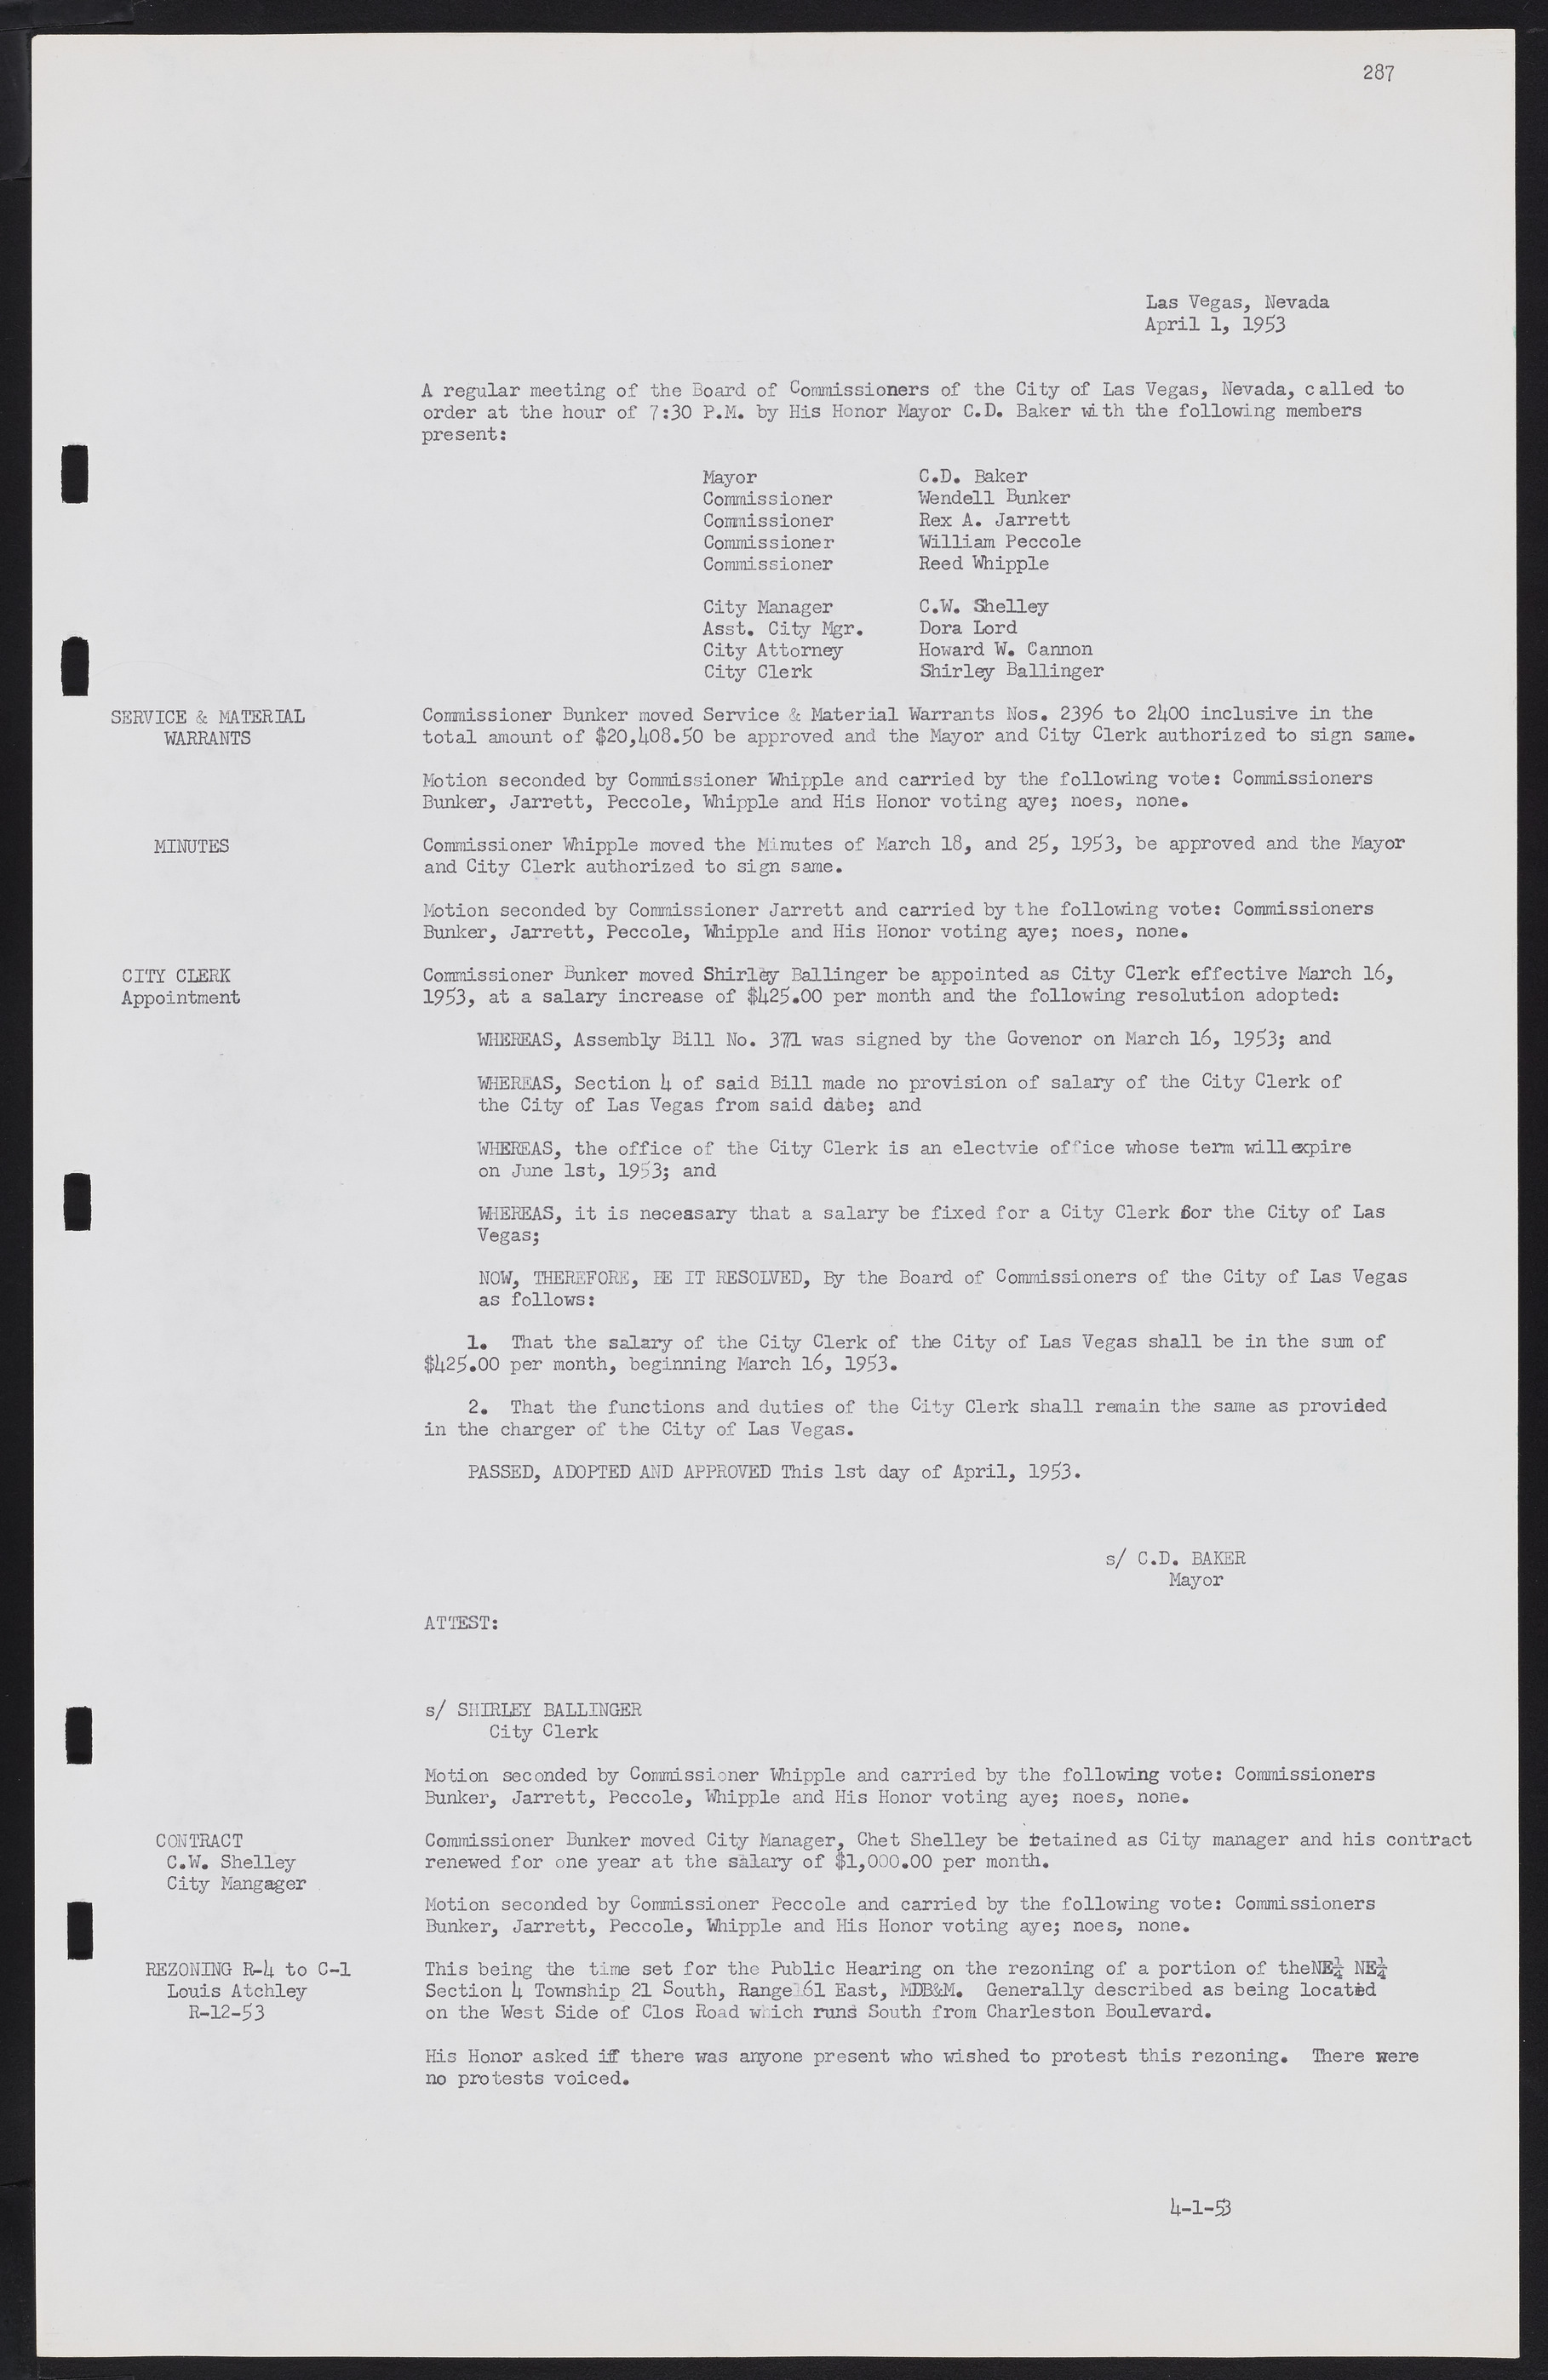 Las Vegas City Commission Minutes, May 26, 1952 to February 17, 1954, lvc000008-315